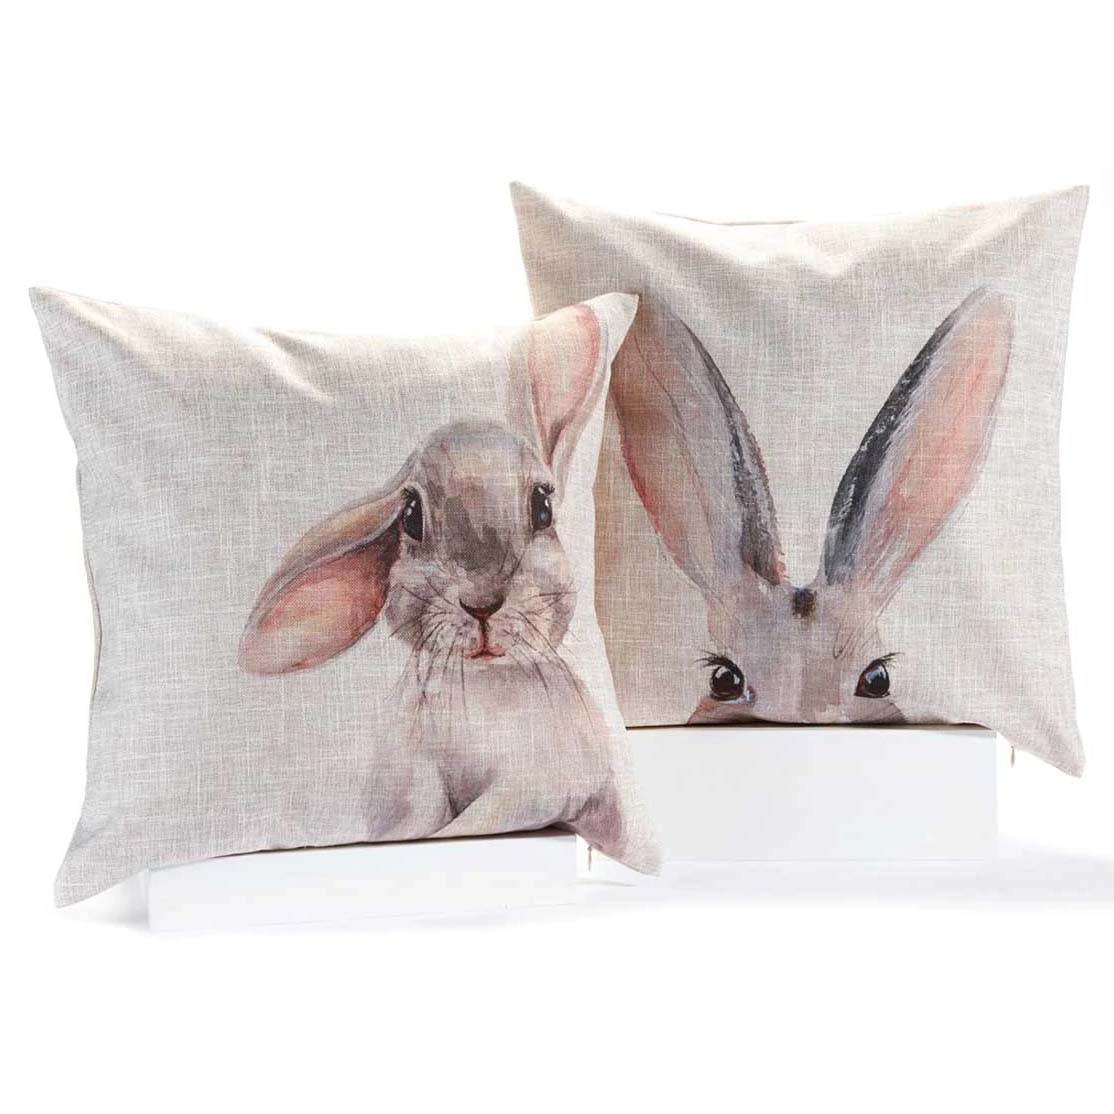 Bunny Pillow Covers